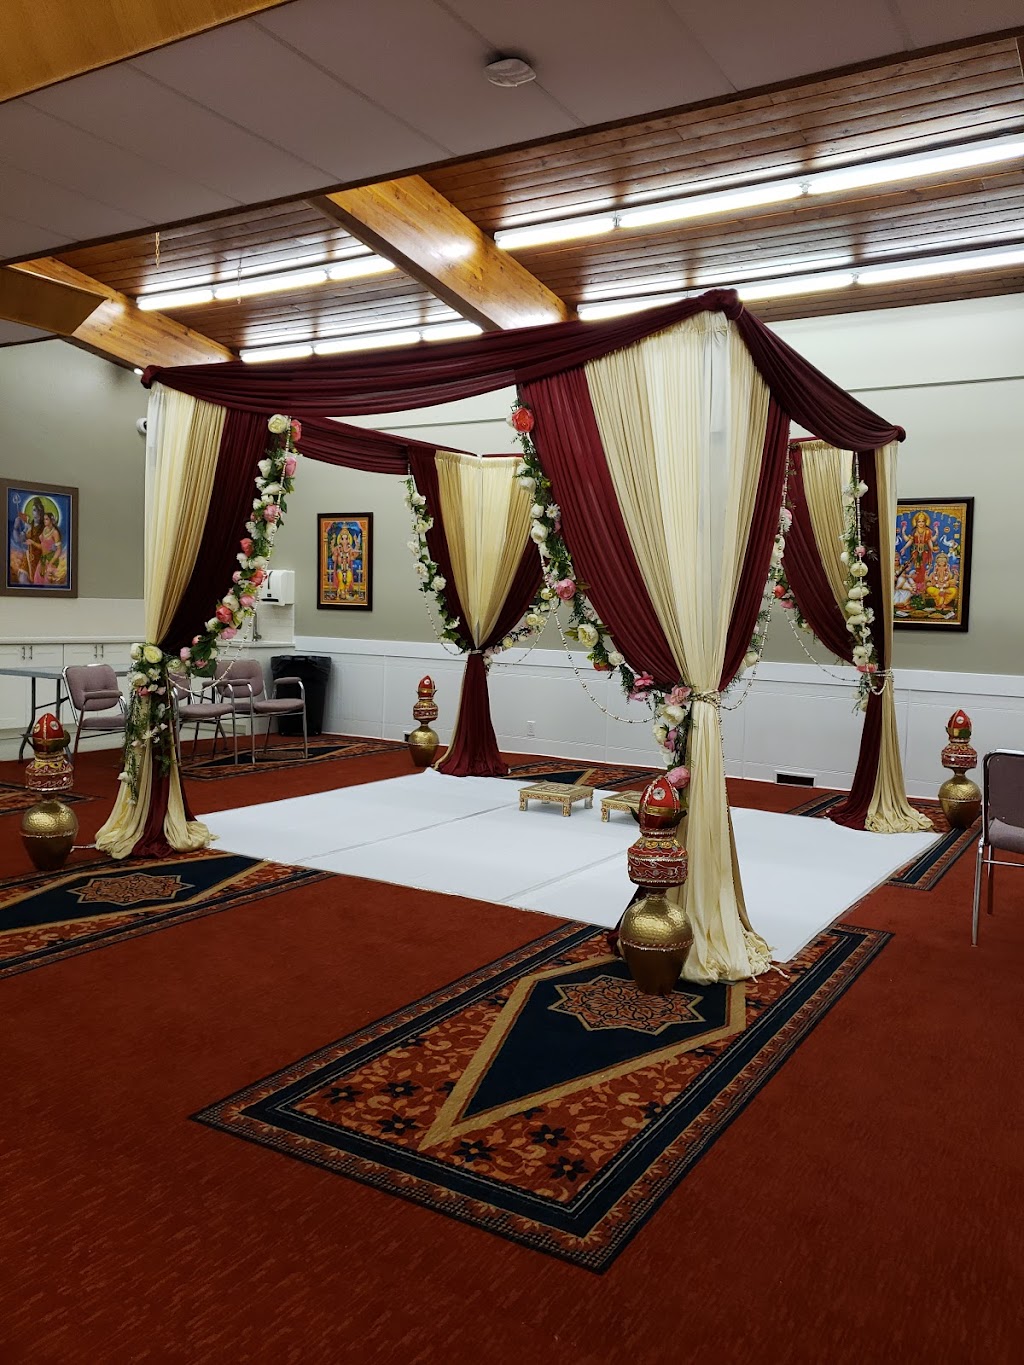 Fiji Multicultural Ctr | 13327 68 St NW, Edmonton, AB T5C 0G1, Canada | Phone: (780) 425-3454